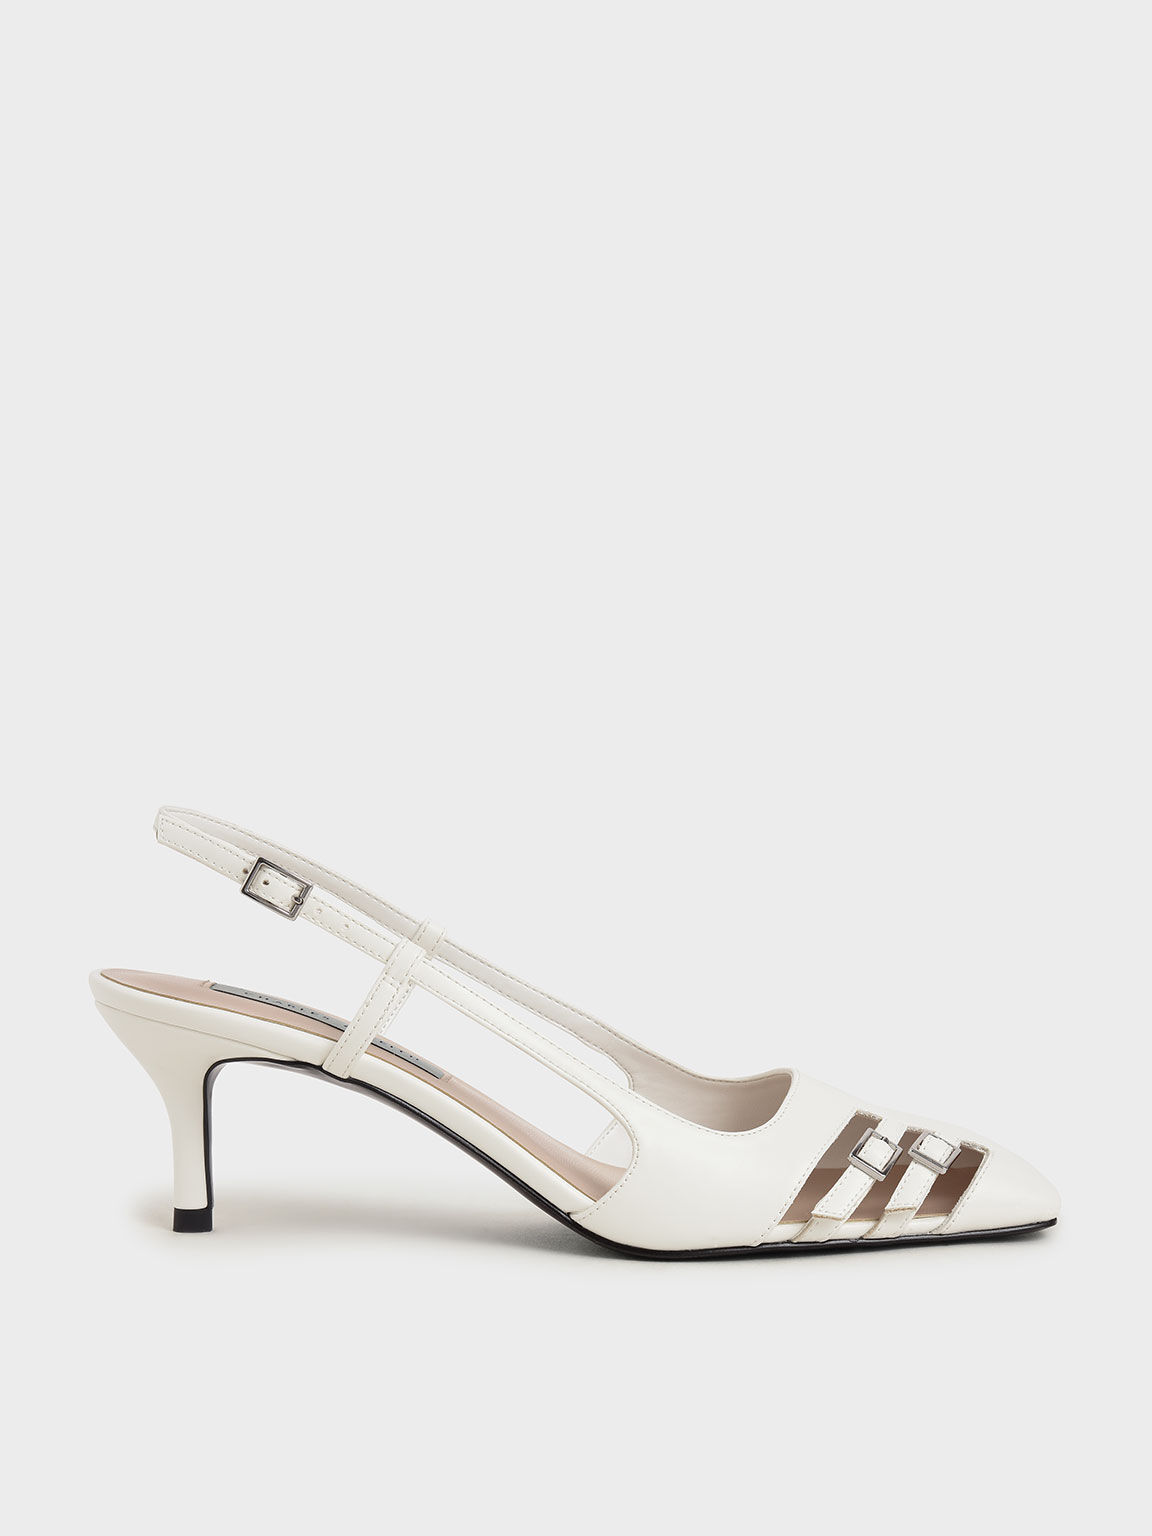 Cut-Out Buckled Slingback Pumps, White, hi-res